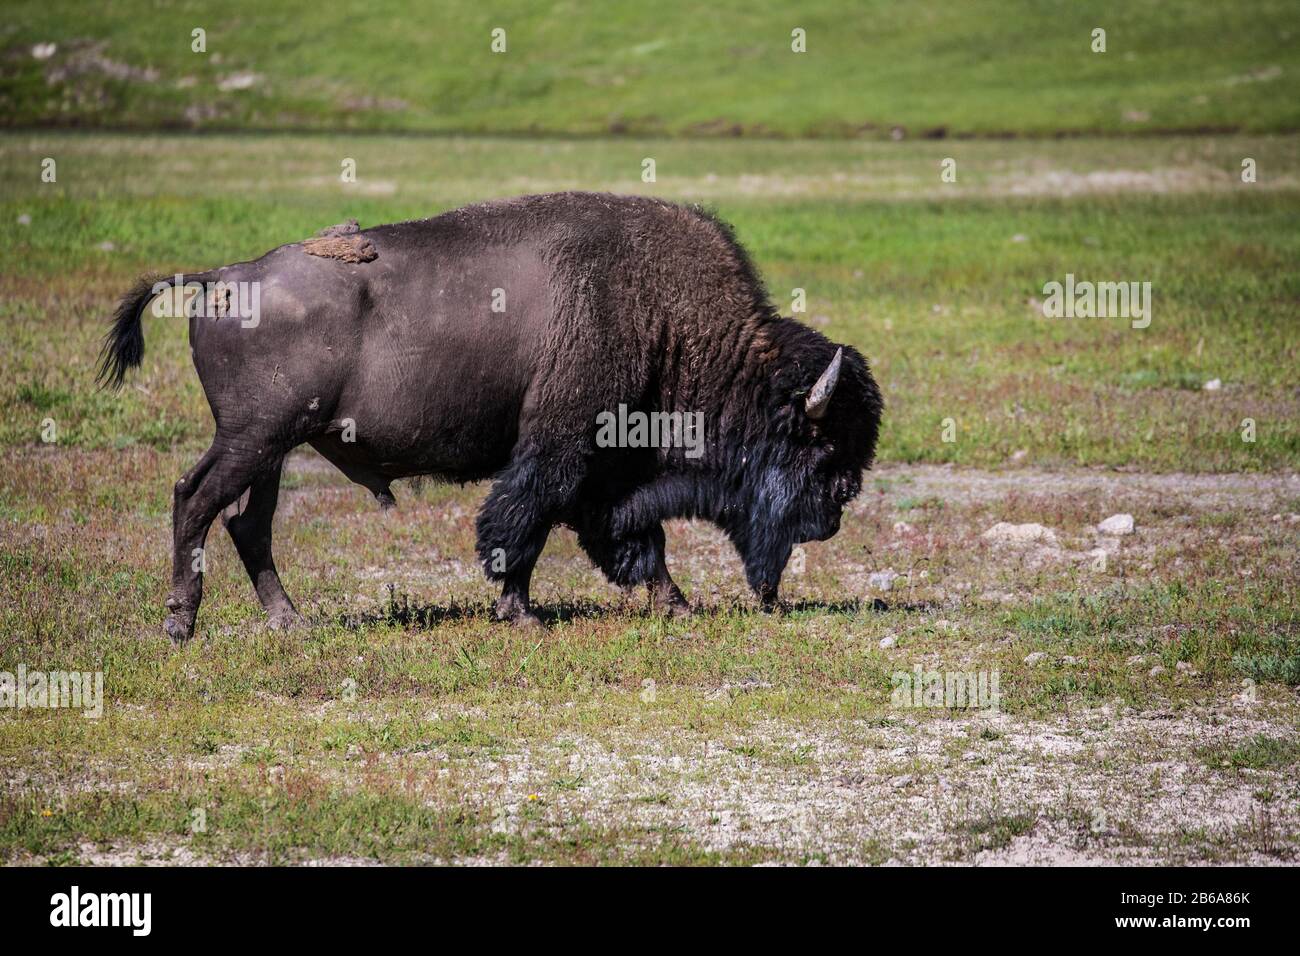 One Bull American Bison in Yellowstone National Park, Wyoming, USA, US funny animals Stock Photo